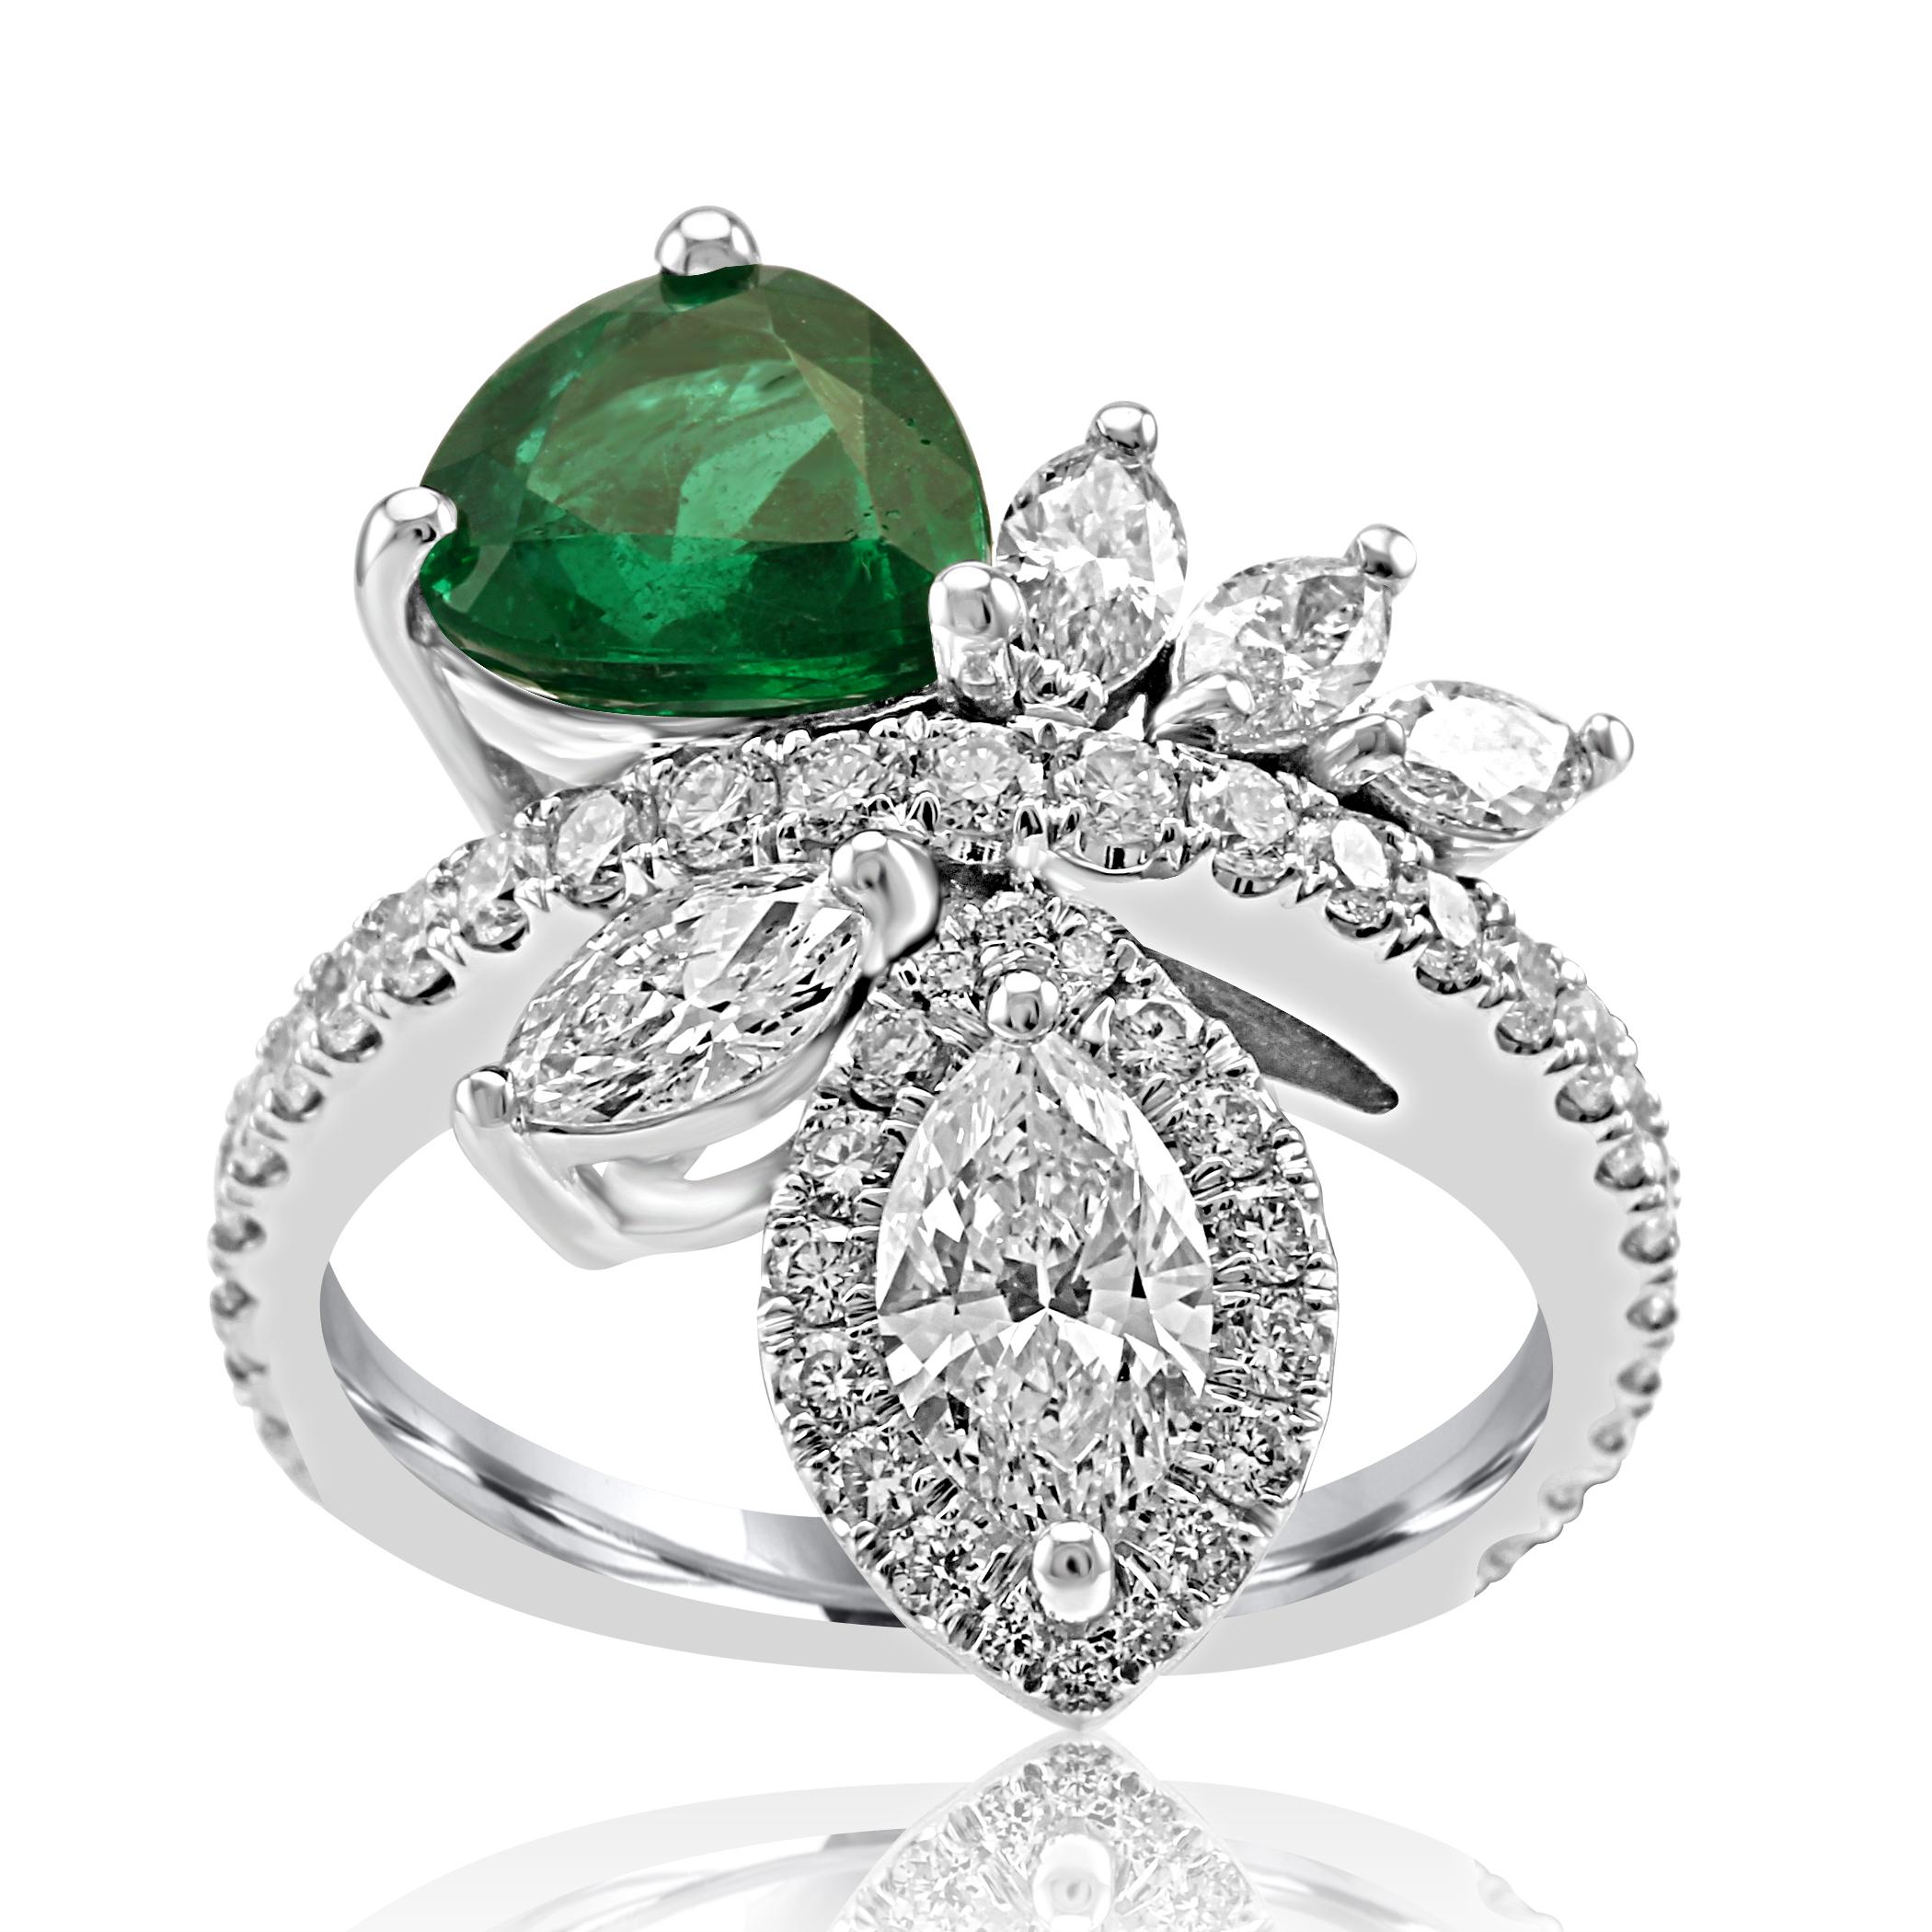 GIA Certified Minor Enhancement 1.72 Carat Gorgeous Emerald Pear Shape Set in White VS-SI Marquise Diamond 1.10 Carat  White VS-SI Diamond Round 0.75 Carat in one of a kind Handmade Flower Fashion Cocktail 18K White Gold Ring.

Emerald Pear 1.72